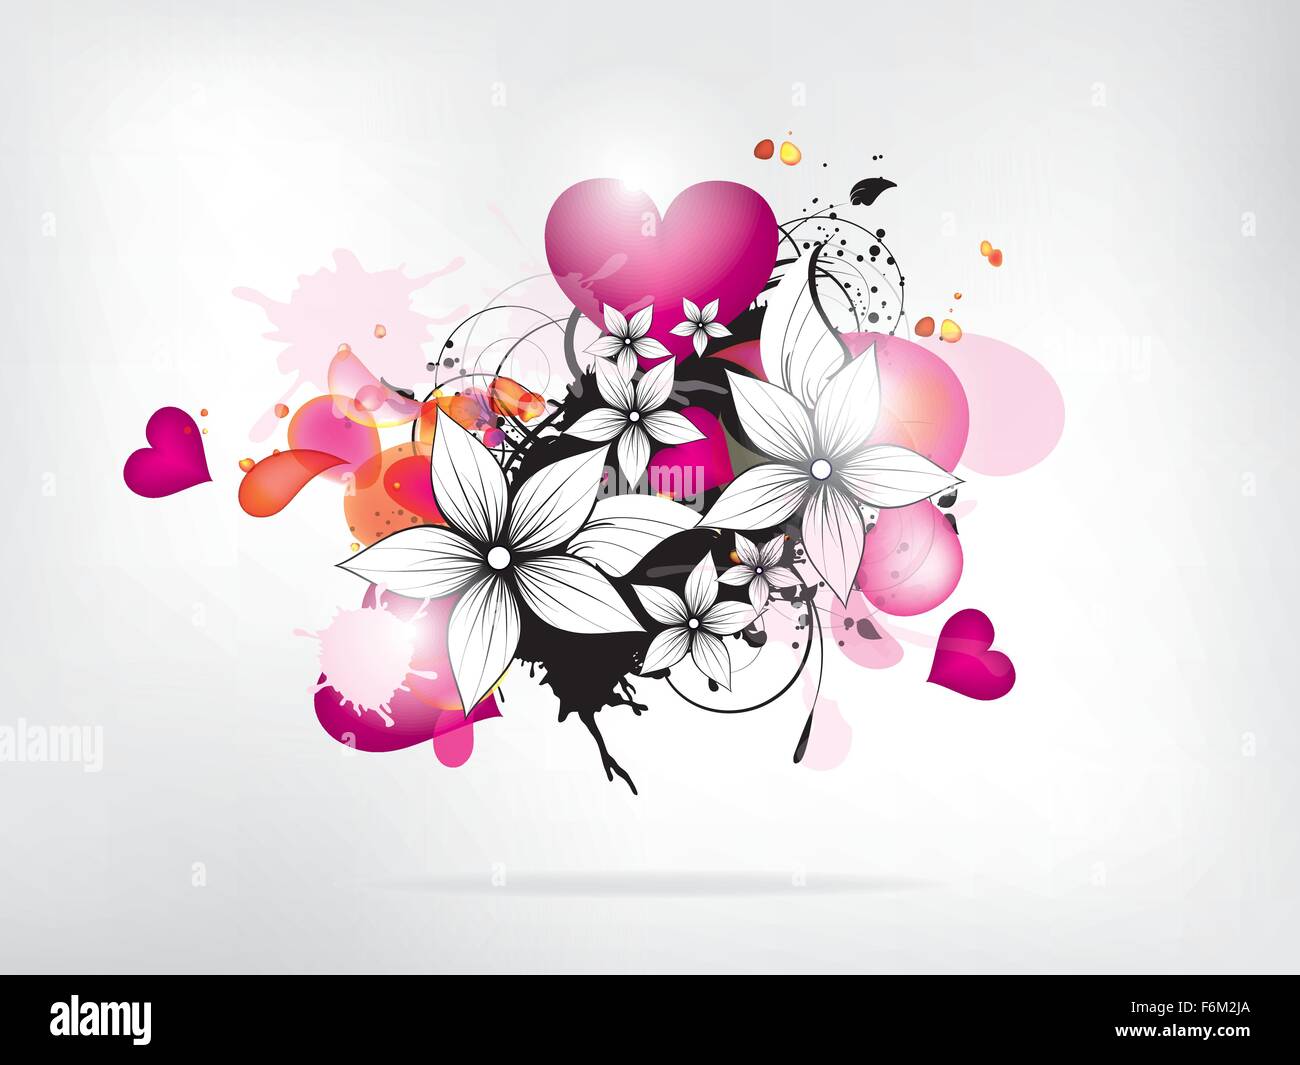 Abstract background with flowers and heart. Abstract vector illustration with background. Stock Vector